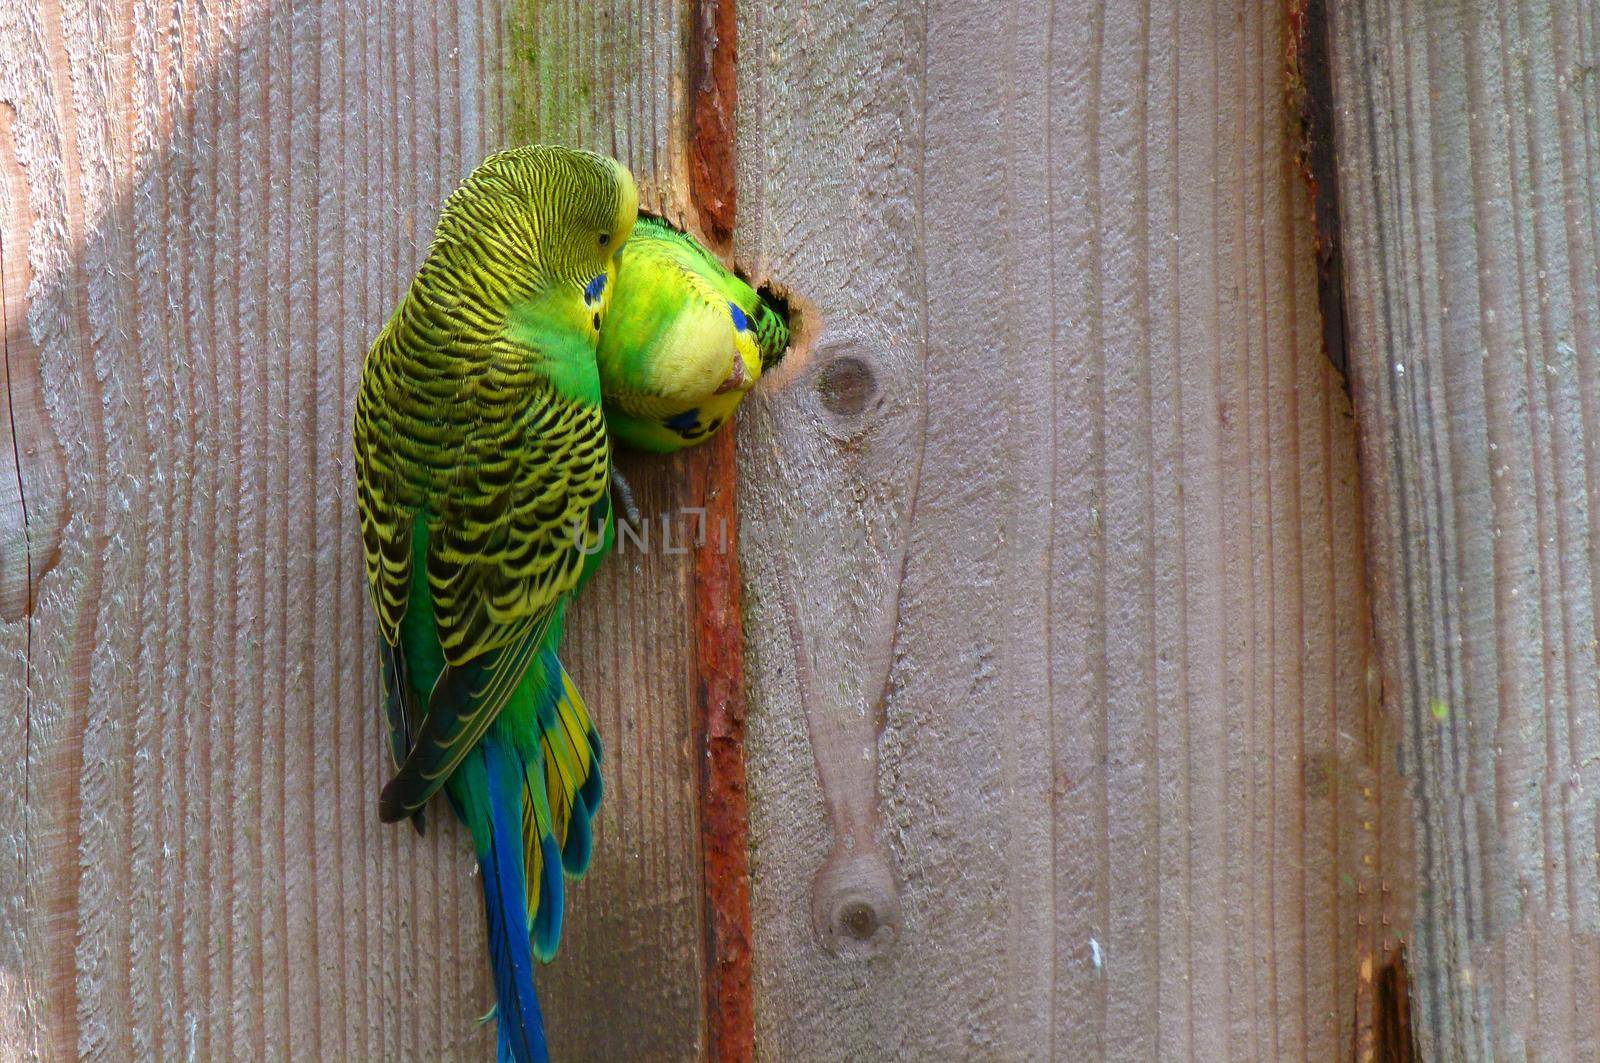 A female budgie looking out of the hole of their nest, she searches for contact with her partner. He is hanging on the wall of their home.